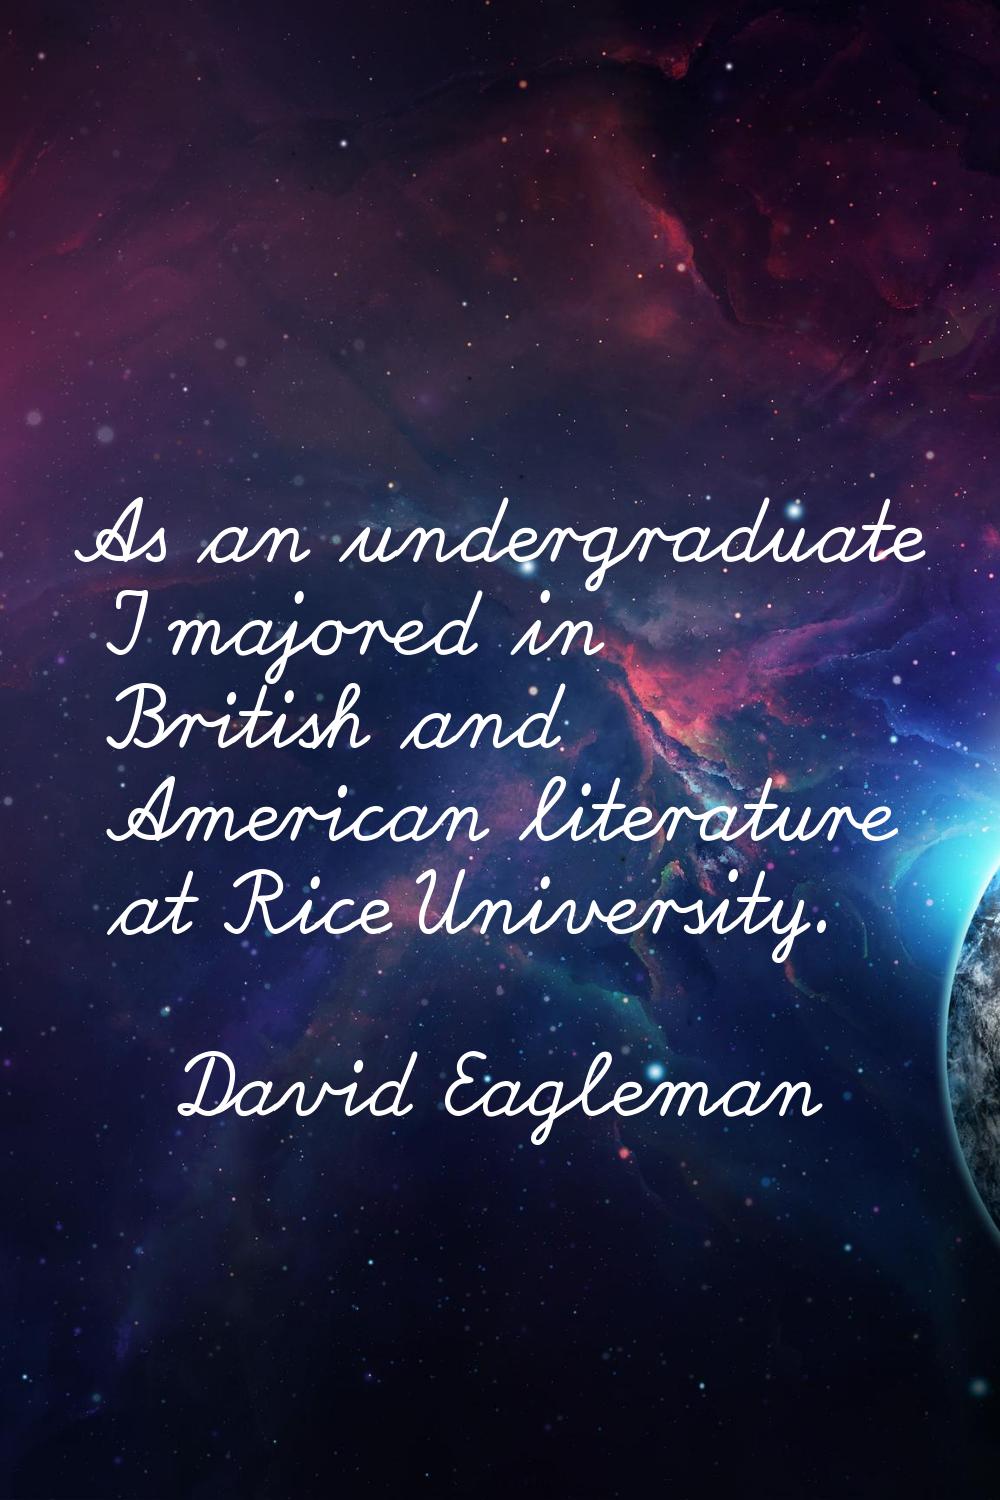 As an undergraduate I majored in British and American literature at Rice University.